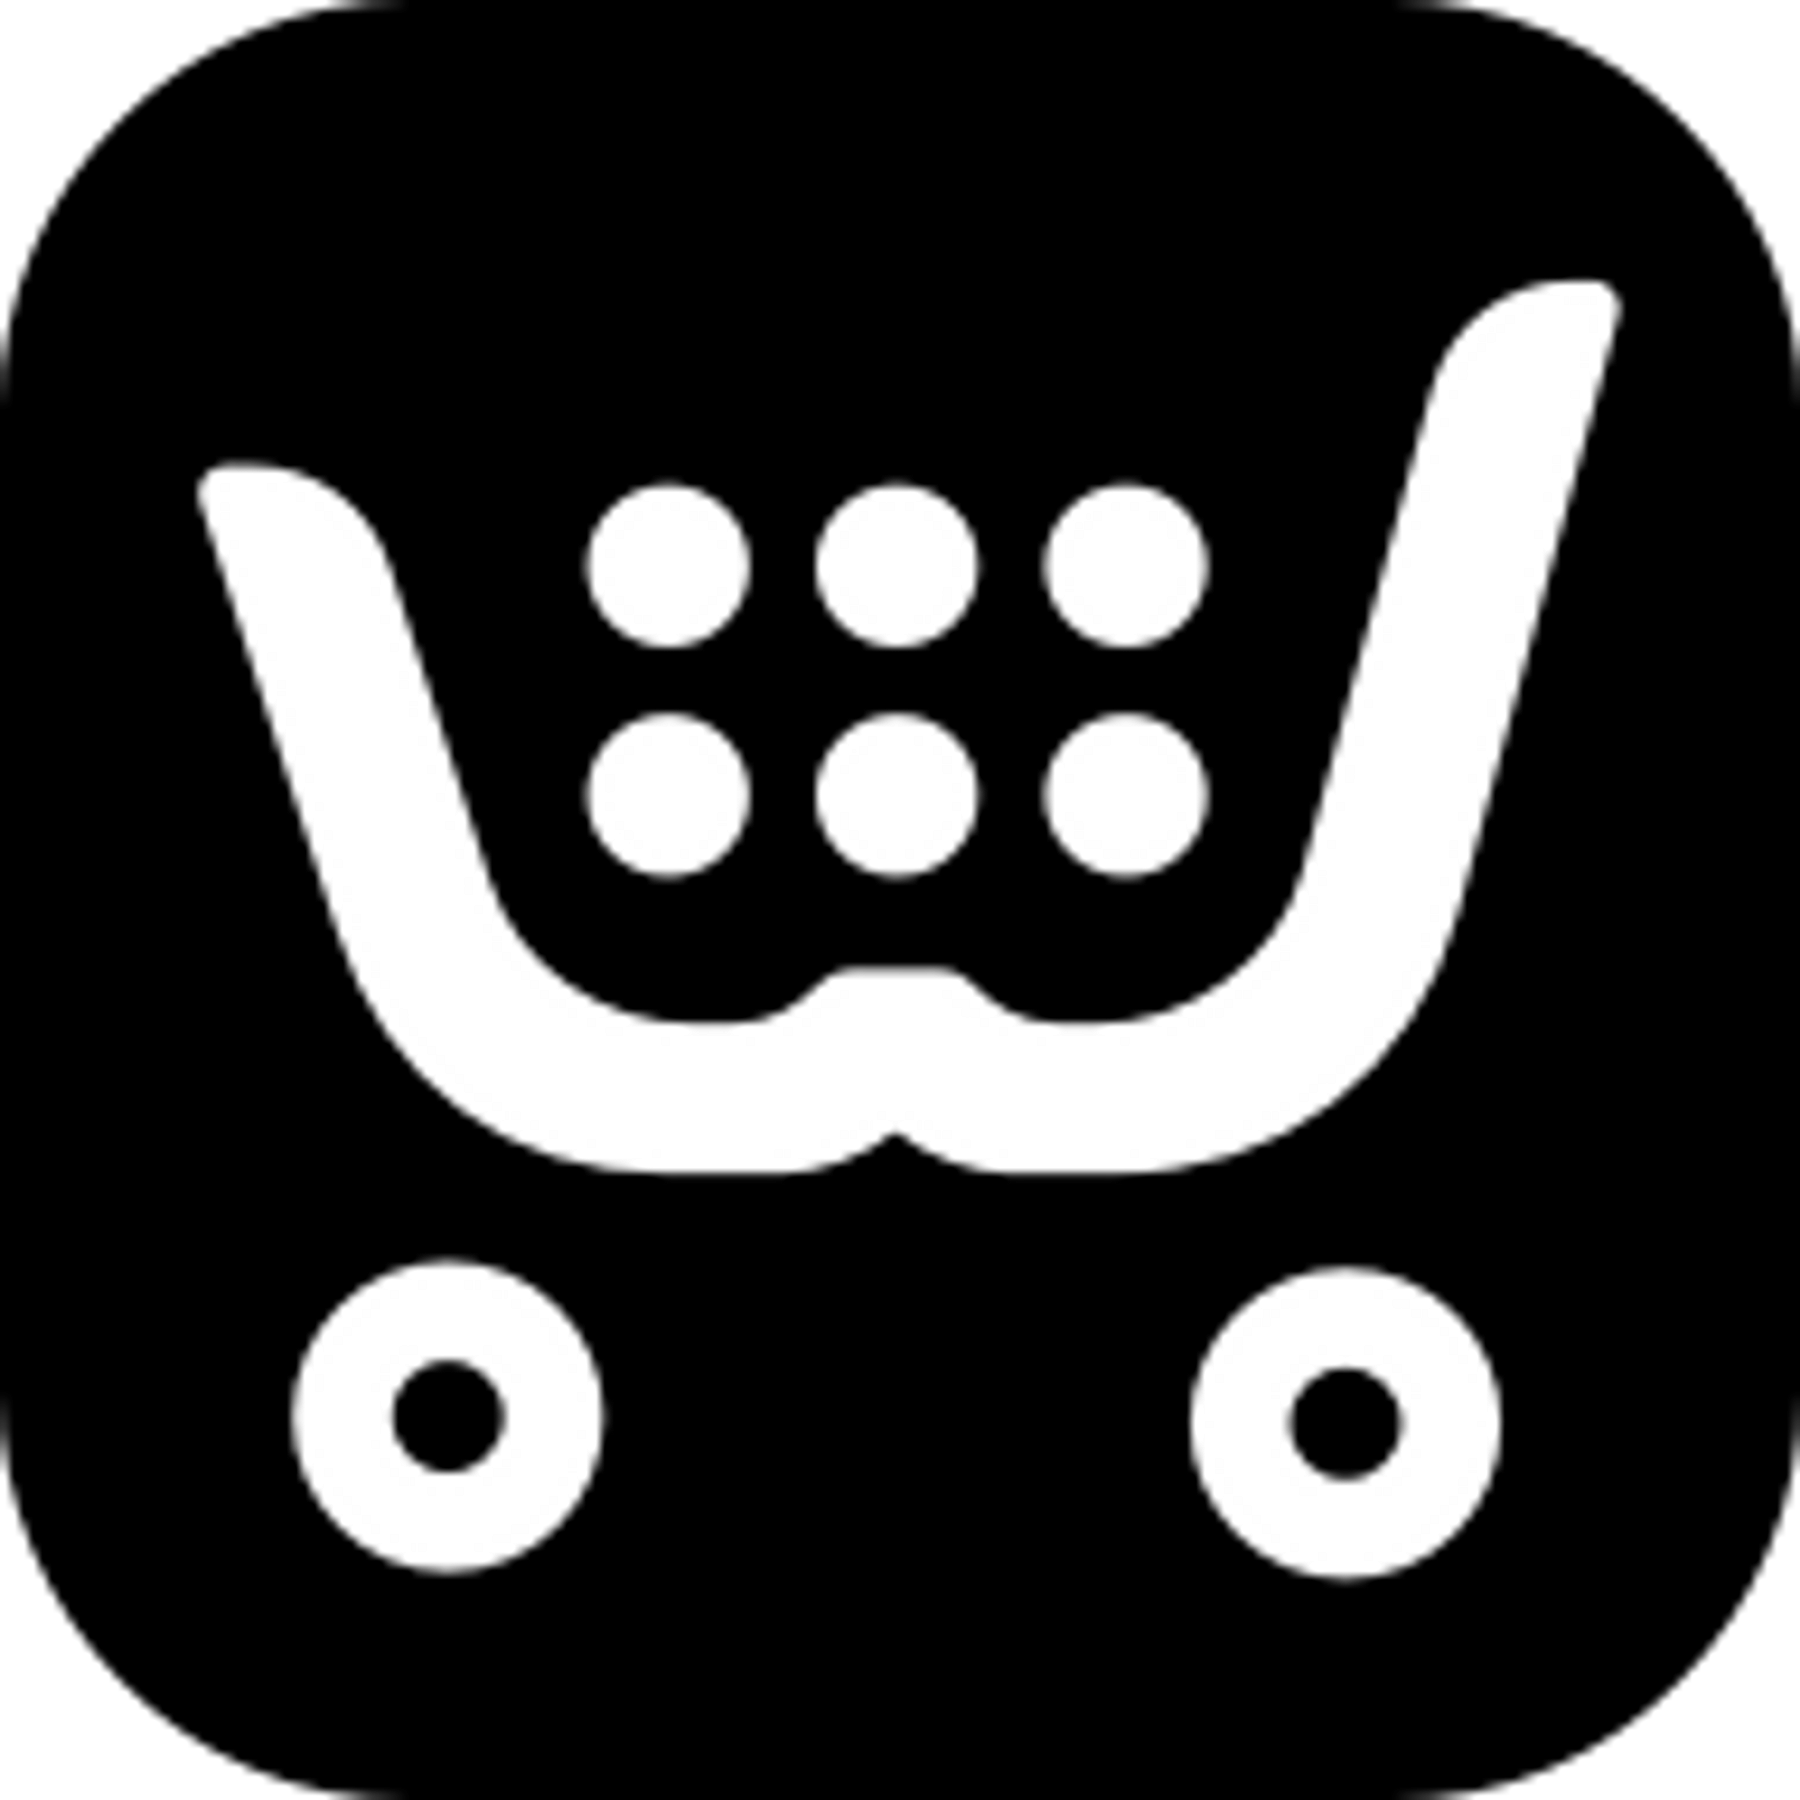 Ecwid: #1 Free and Easy E-commerce Shopping Cart Solution - Try Ecwid Today!